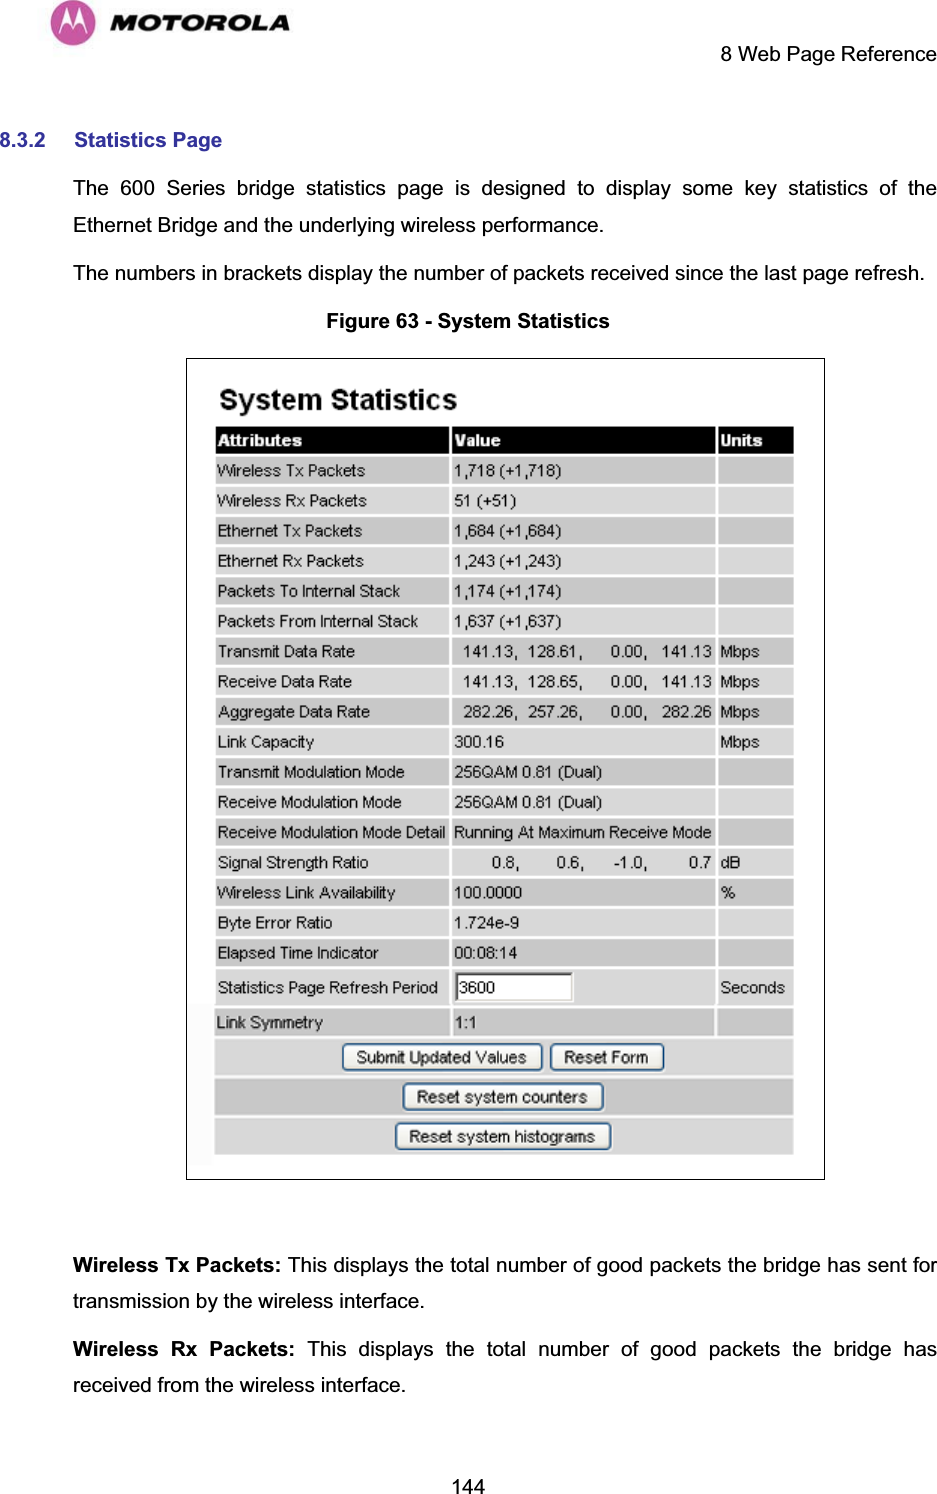     8 Web Page Reference  1448.3.2 Statistics Page  The 600 Series bridge statistics page is designed to display some key statistics of the Ethernet Bridge and the underlying wireless performance.  The numbers in brackets display the number of packets received since the last page refresh. Figure 63 - System Statistics   Wireless Tx Packets: This displays the total number of good packets the bridge has sent for transmission by the wireless interface. Wireless Rx Packets: This displays the total number of good packets the bridge has received from the wireless interface. 